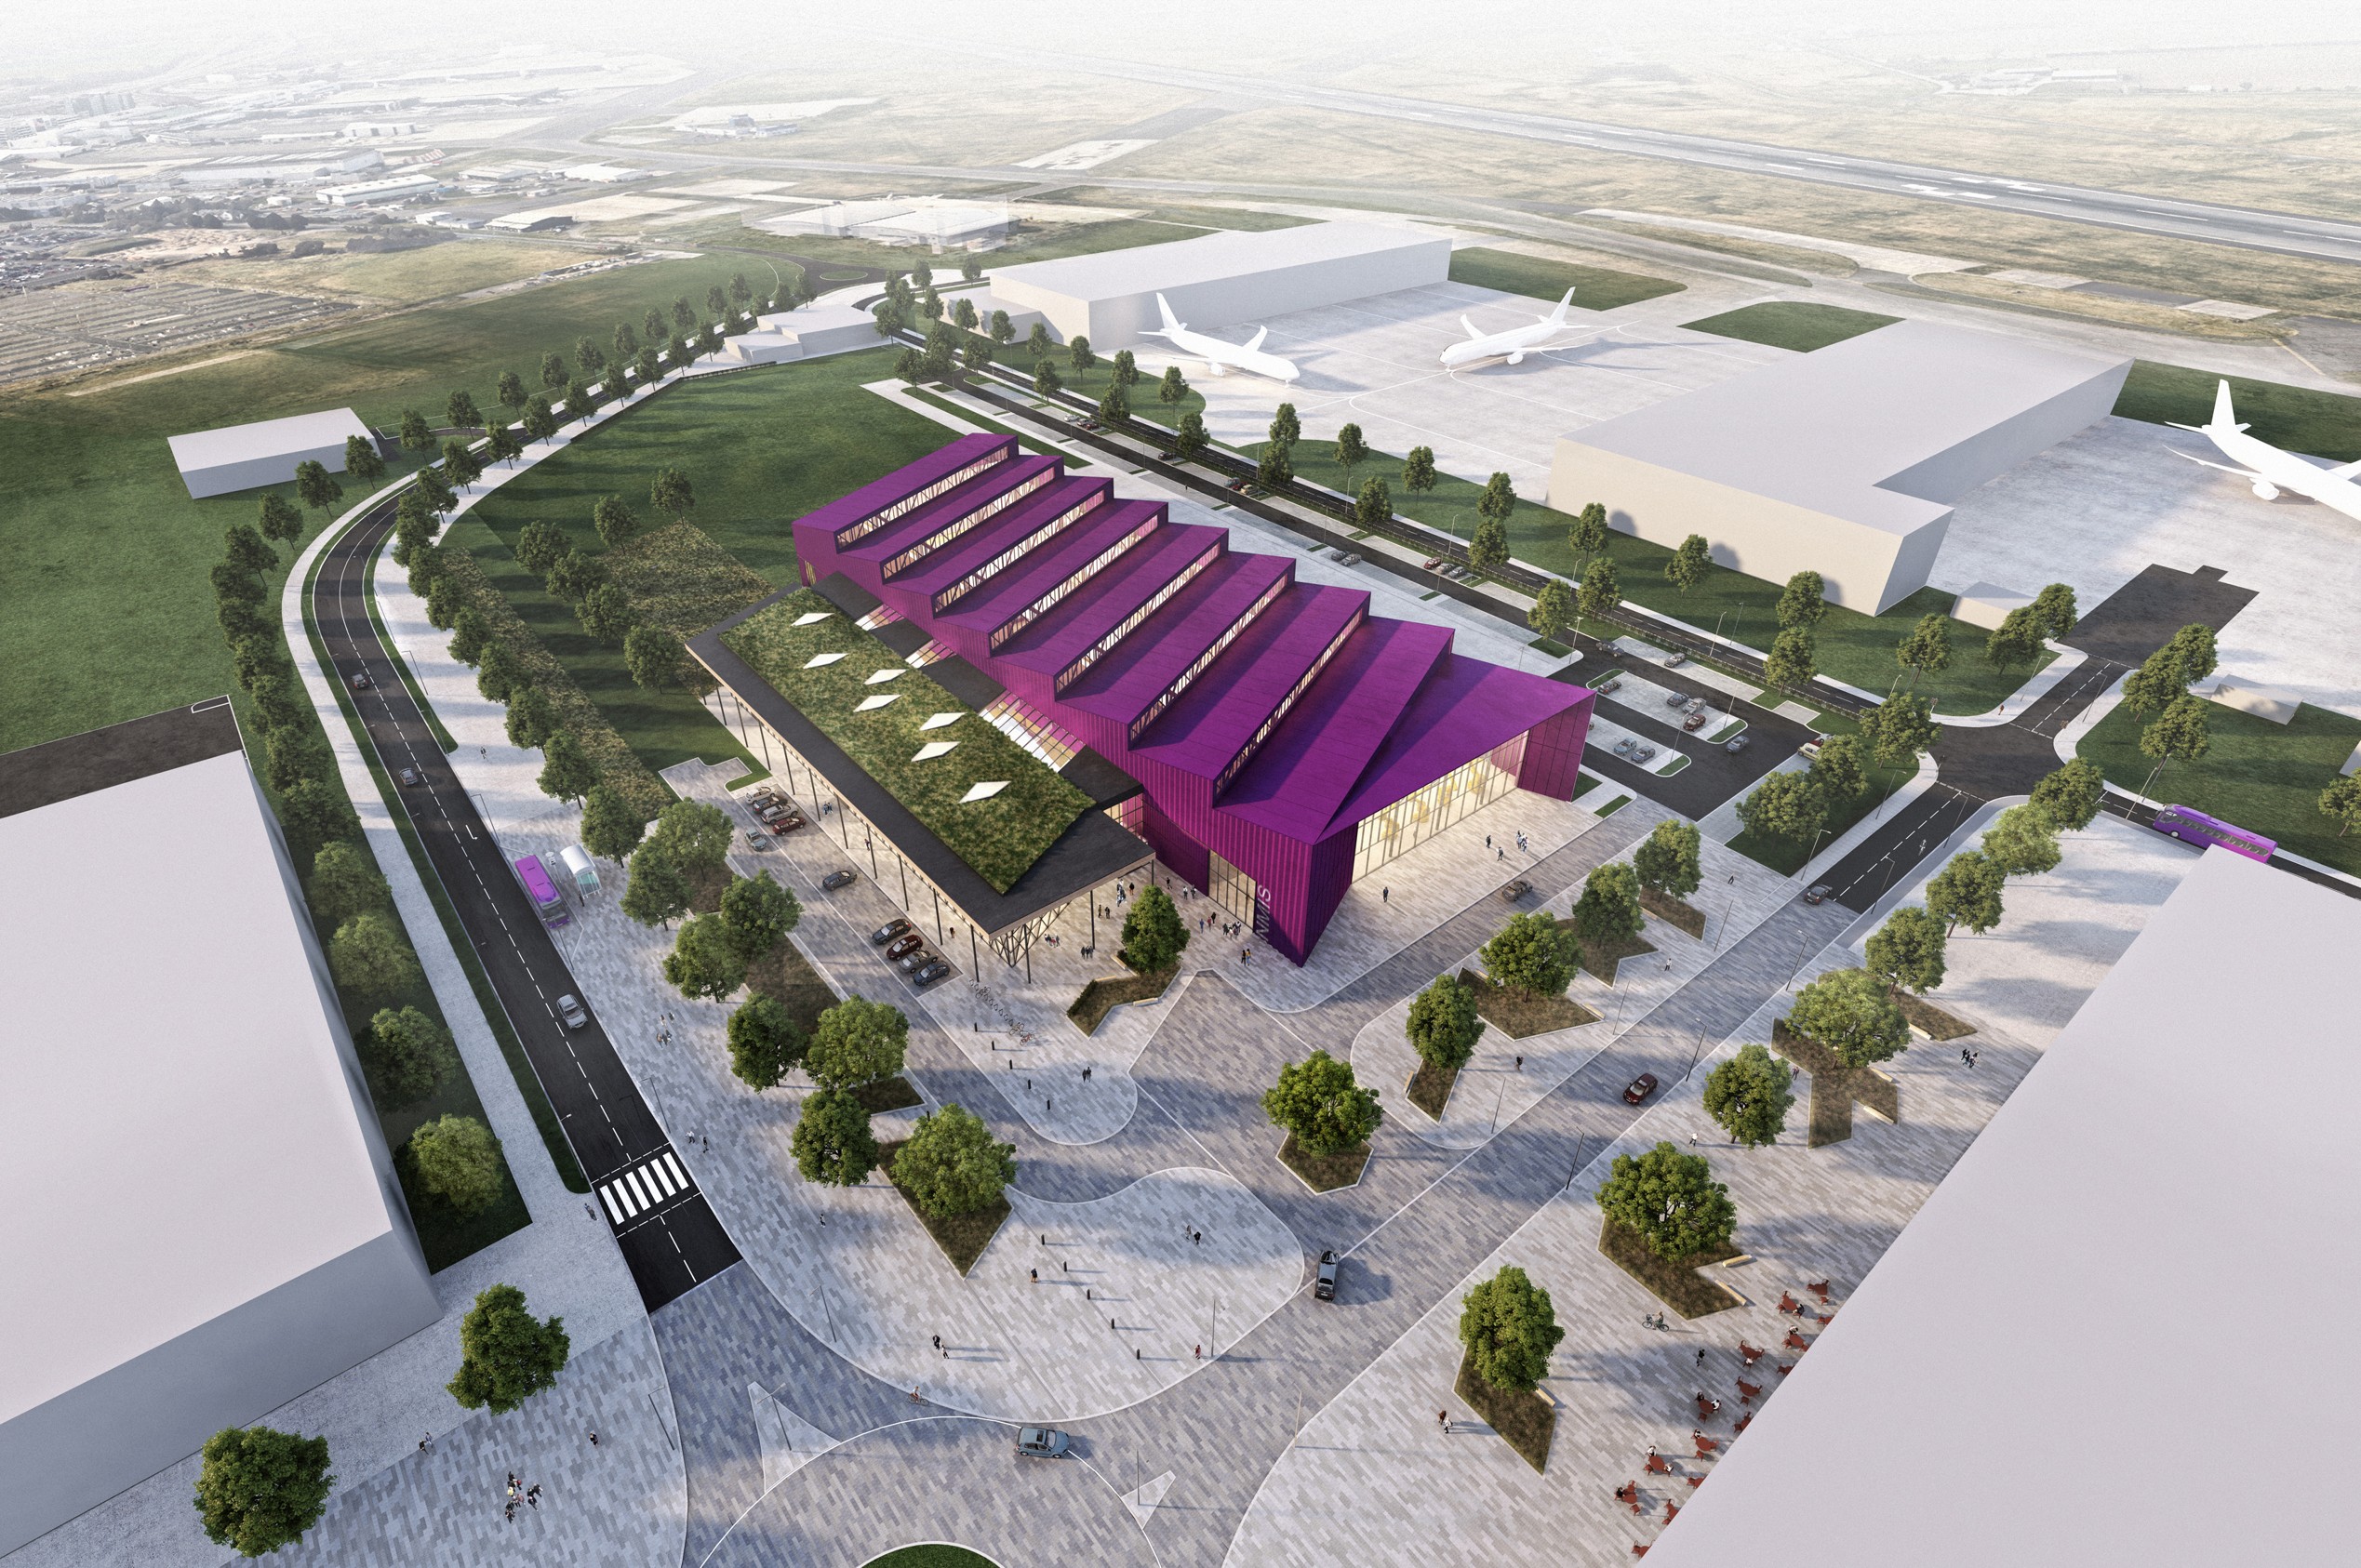 National Manufacturing Institute Scotland facility gets planning green light